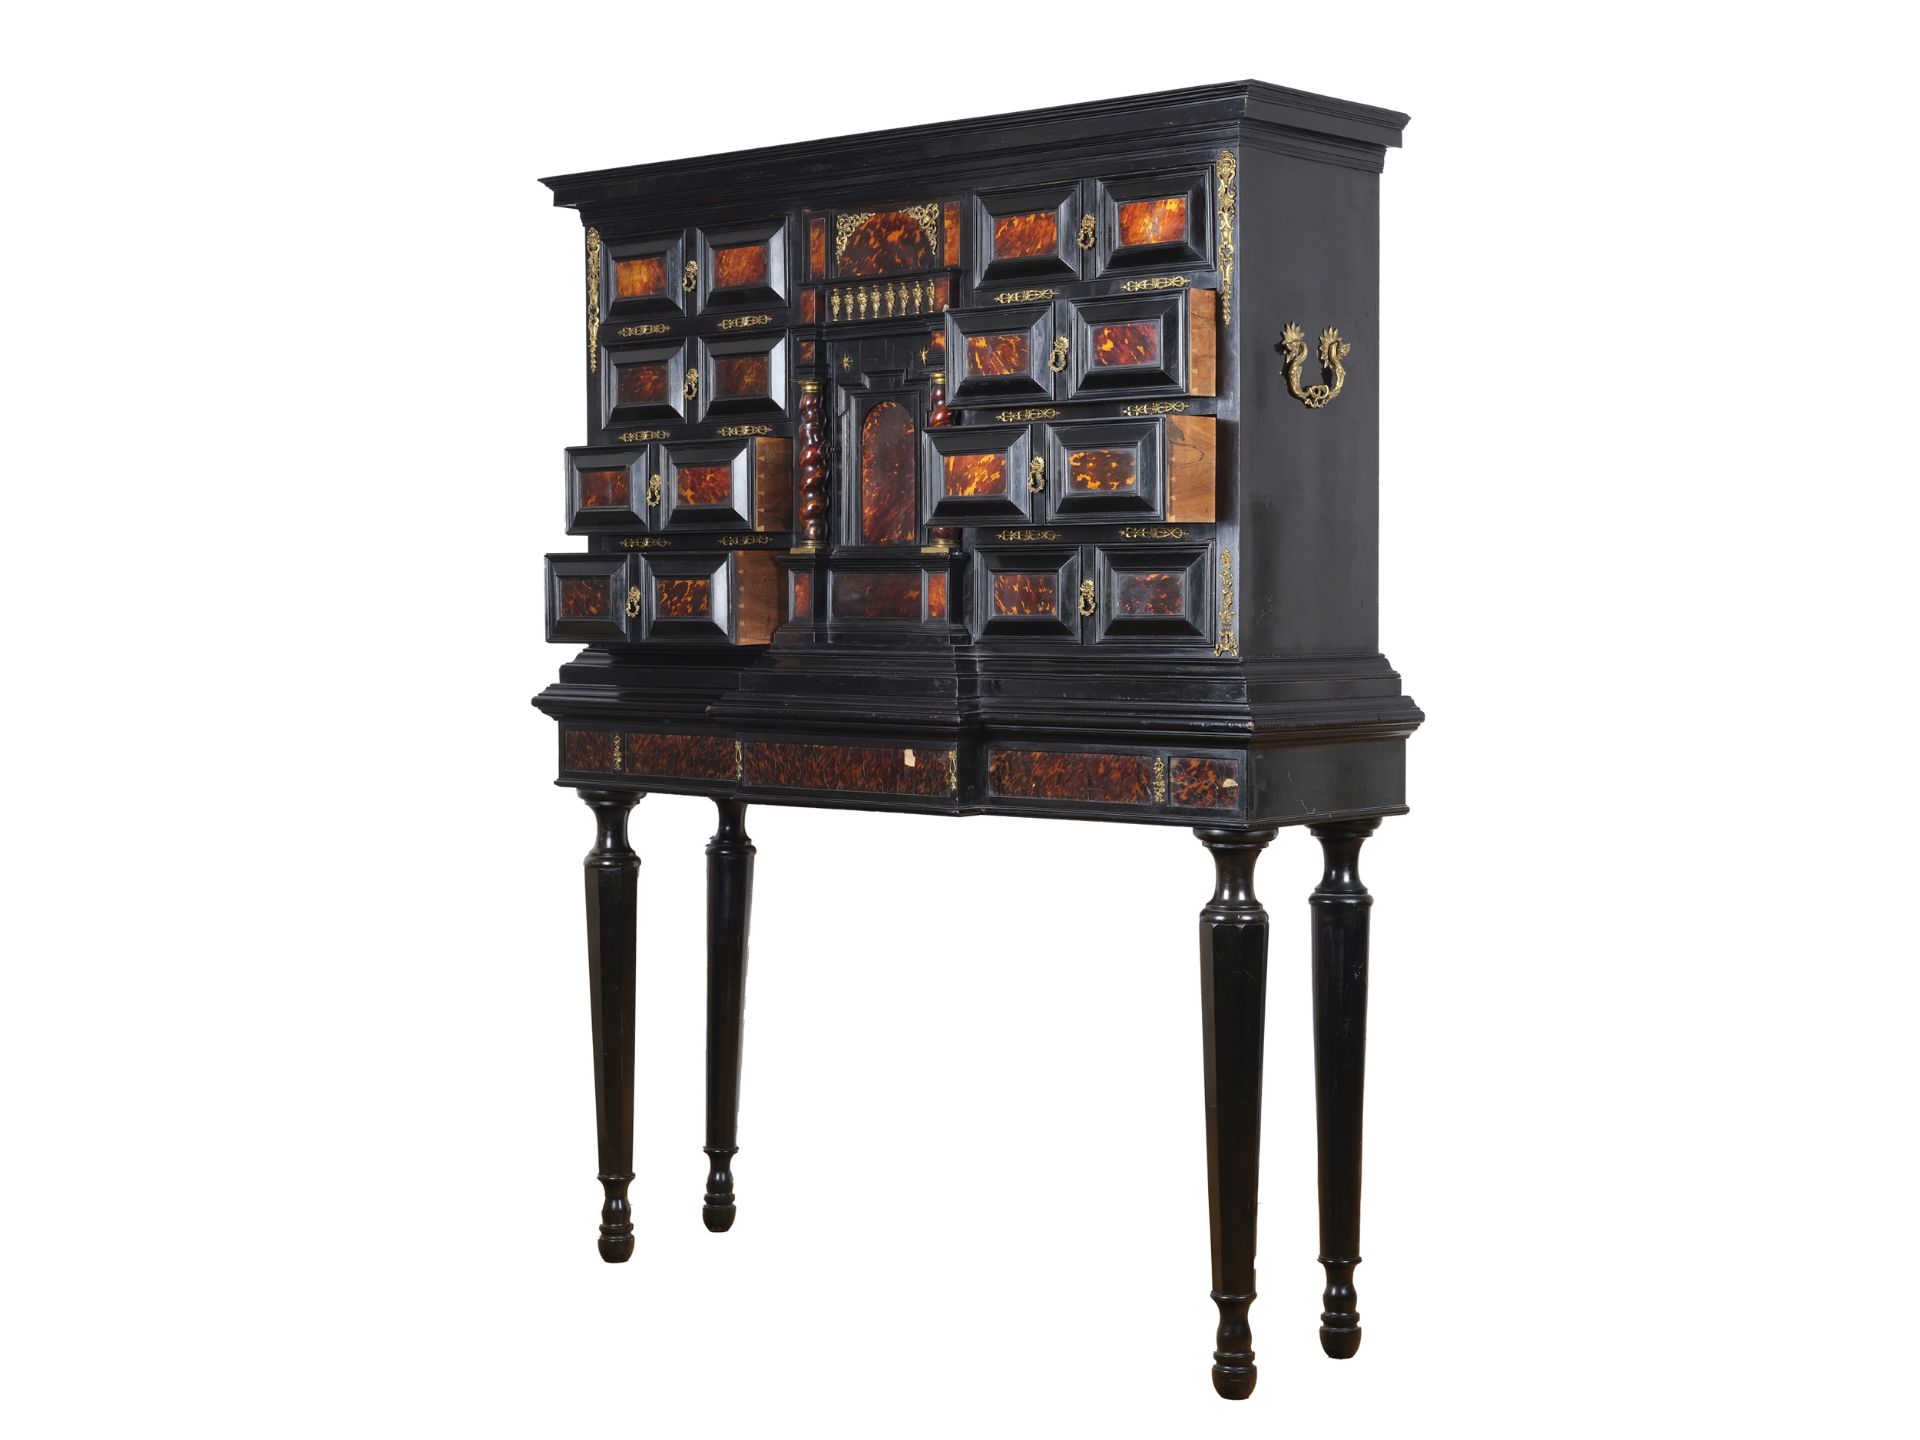 Top cabinet, German or Flemish, in the style of the 17th century - Image 5 of 7